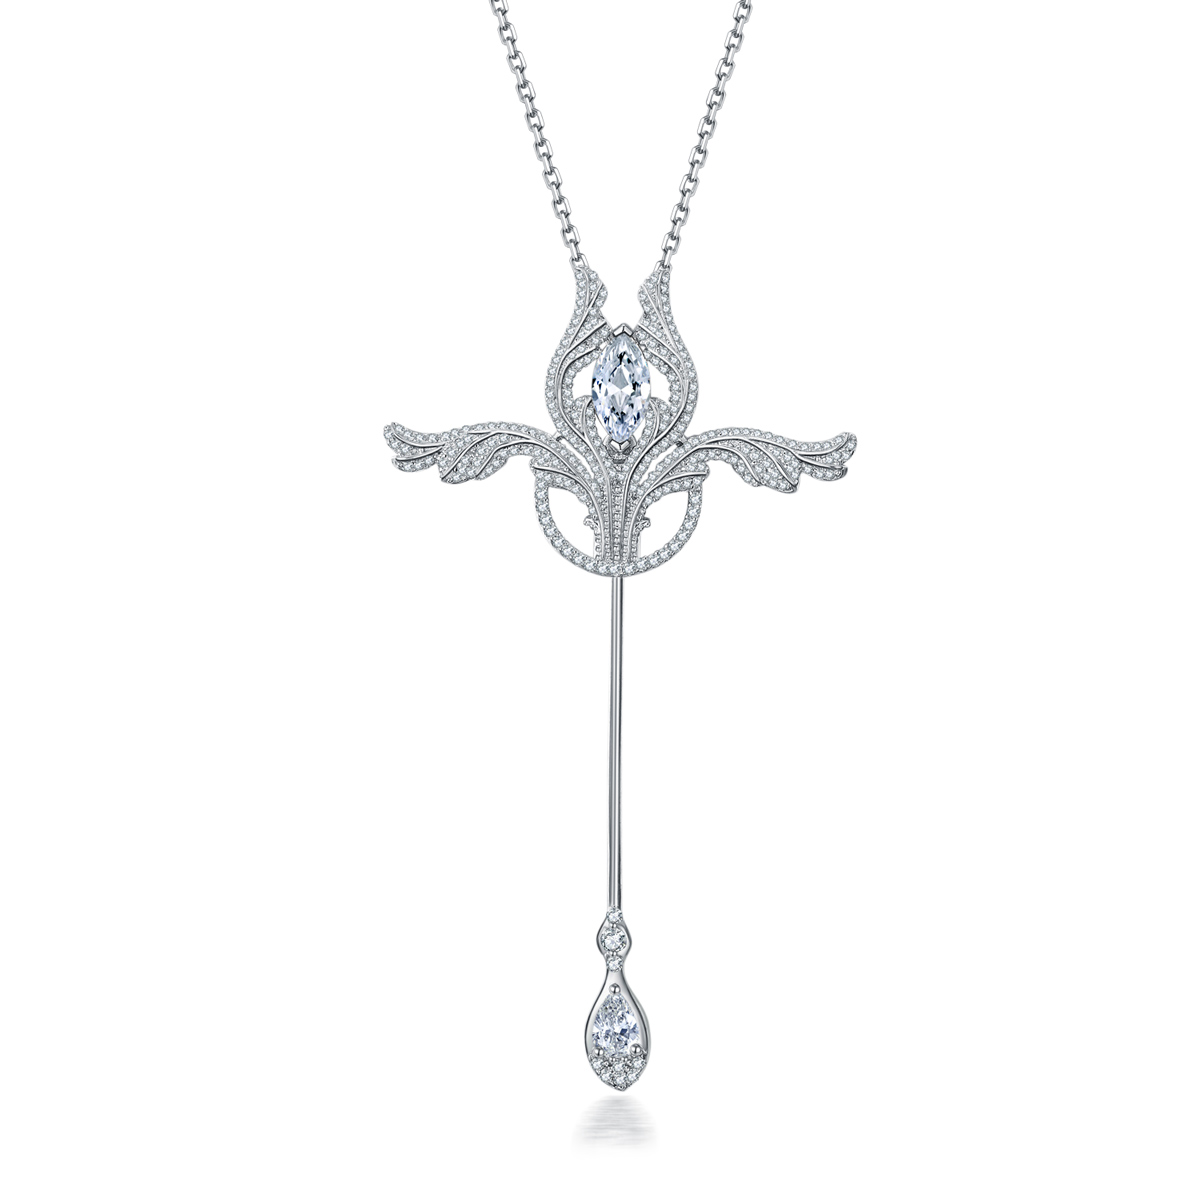 Silver-white lady's ins-style original angel scepter S925 silver necklace and choker double-wear sweater chain can be used as a brooch for daily use